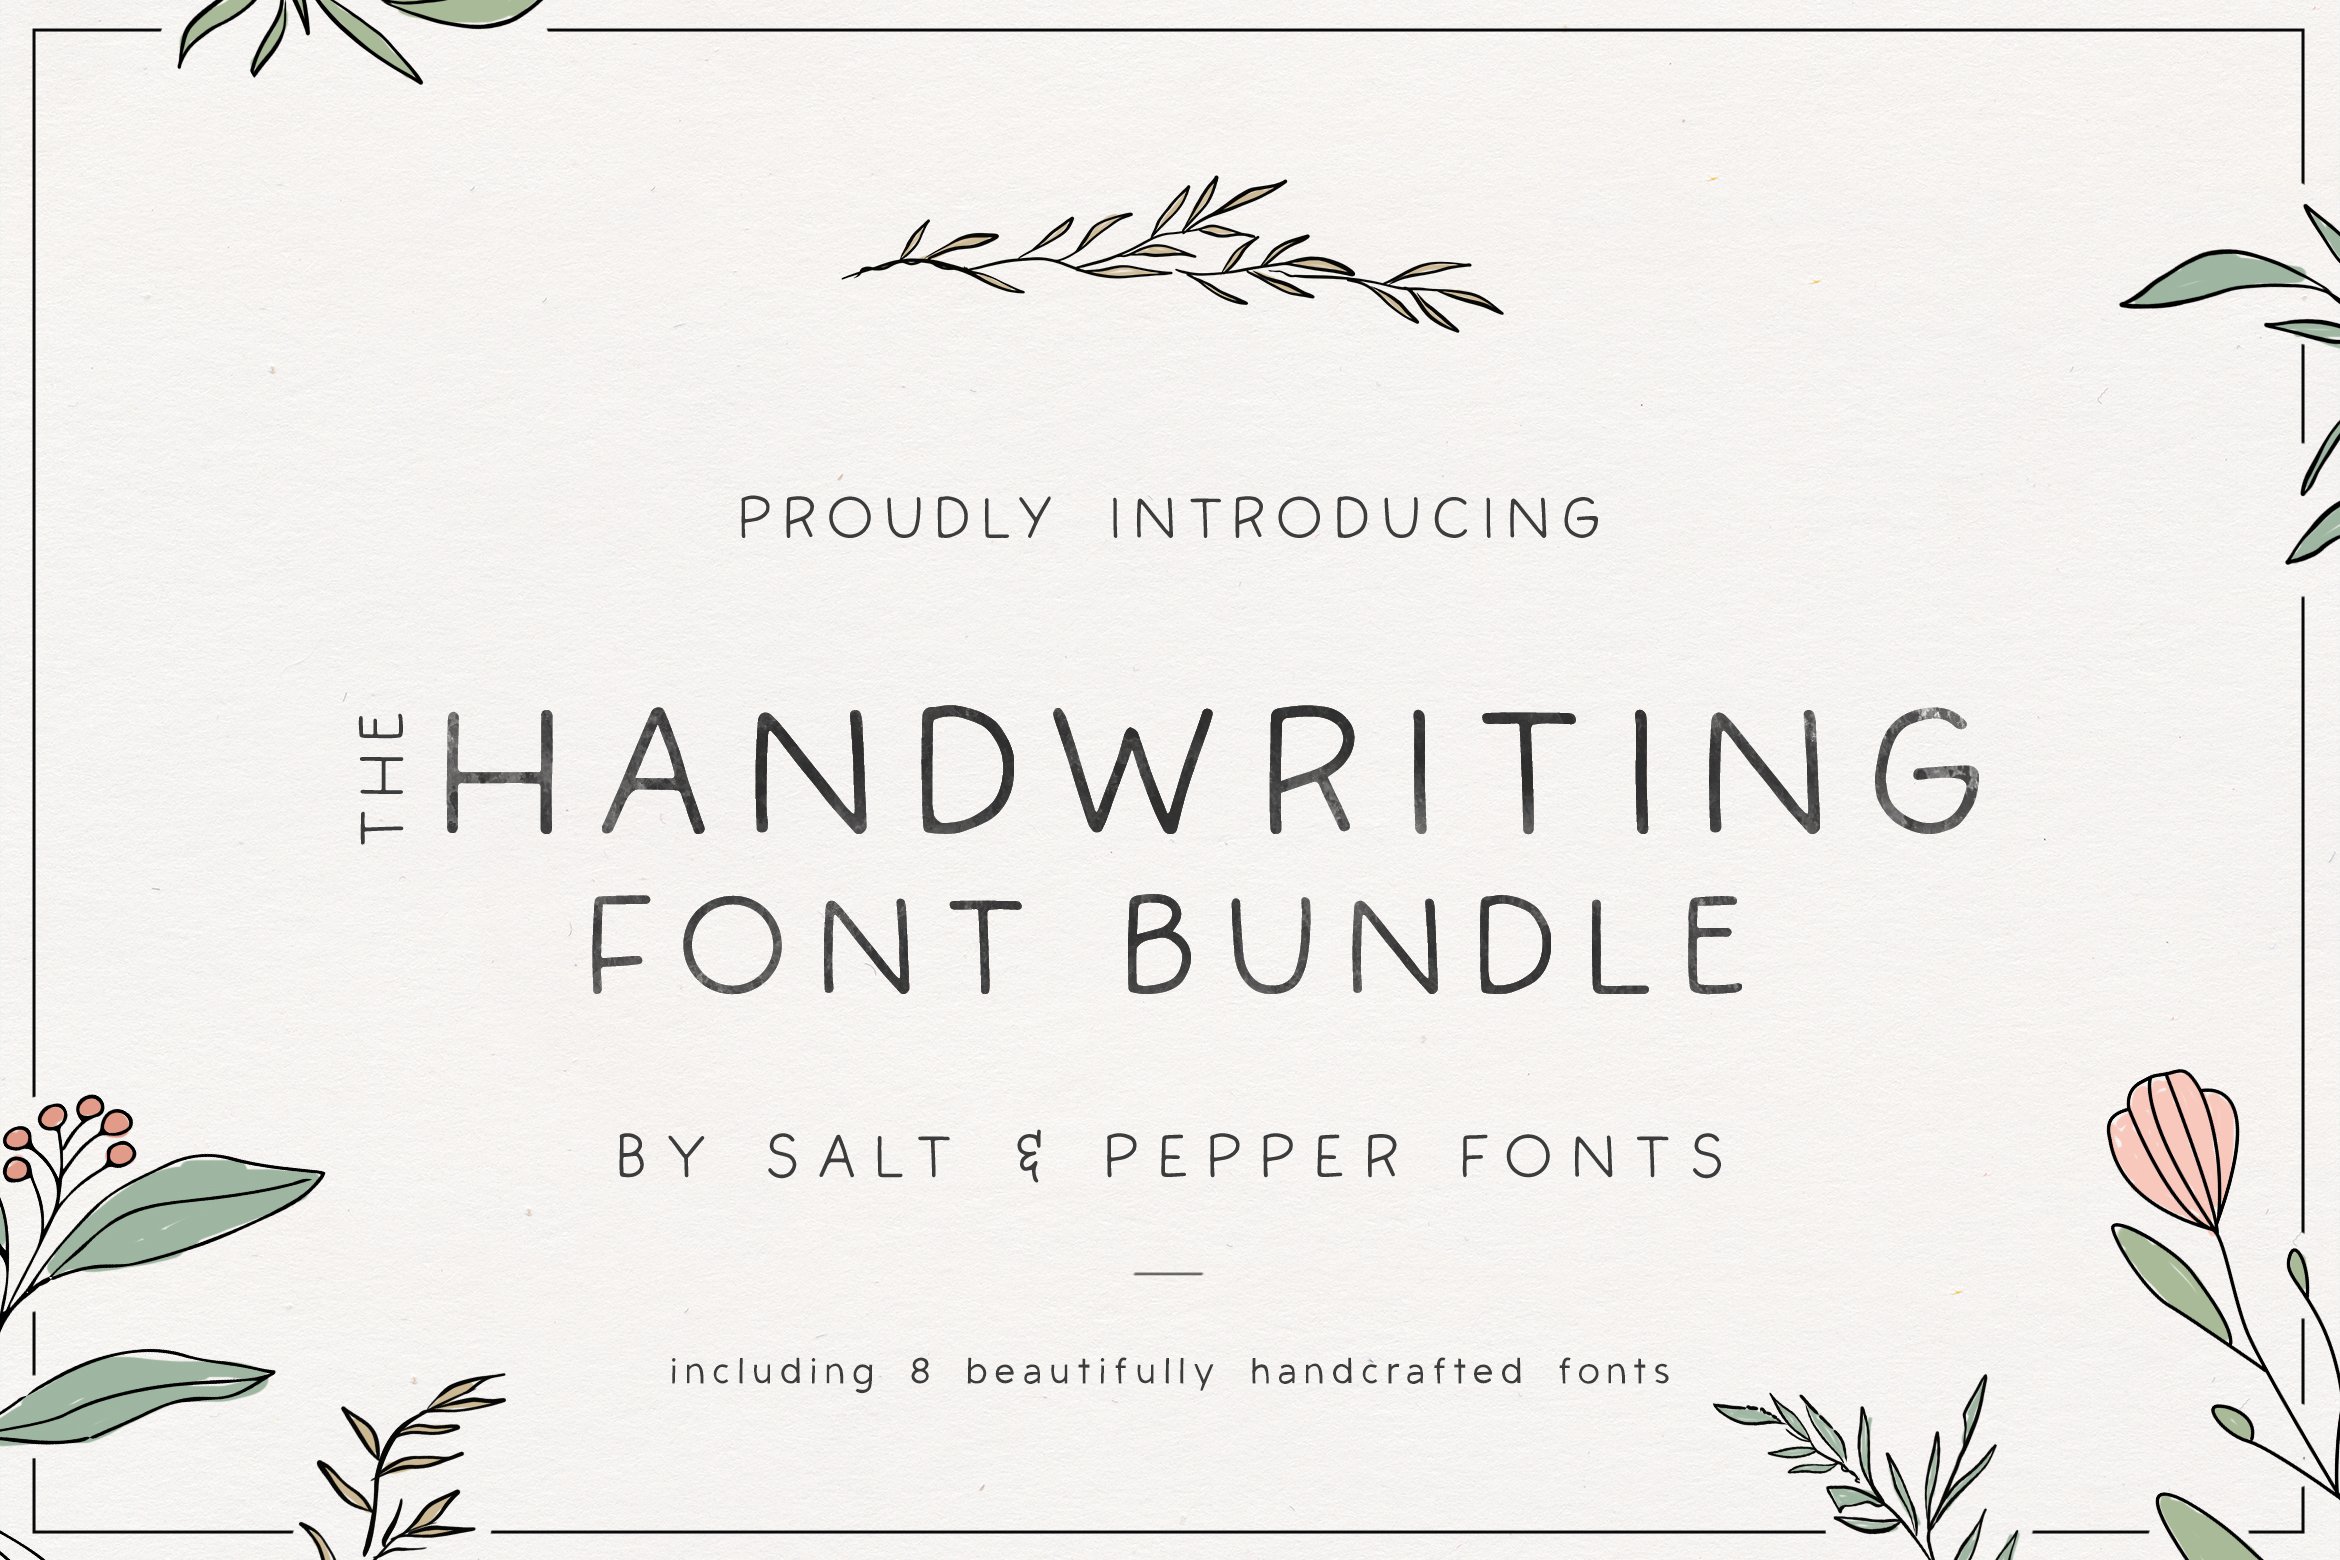 The Handwriting Font Bundle cover image.